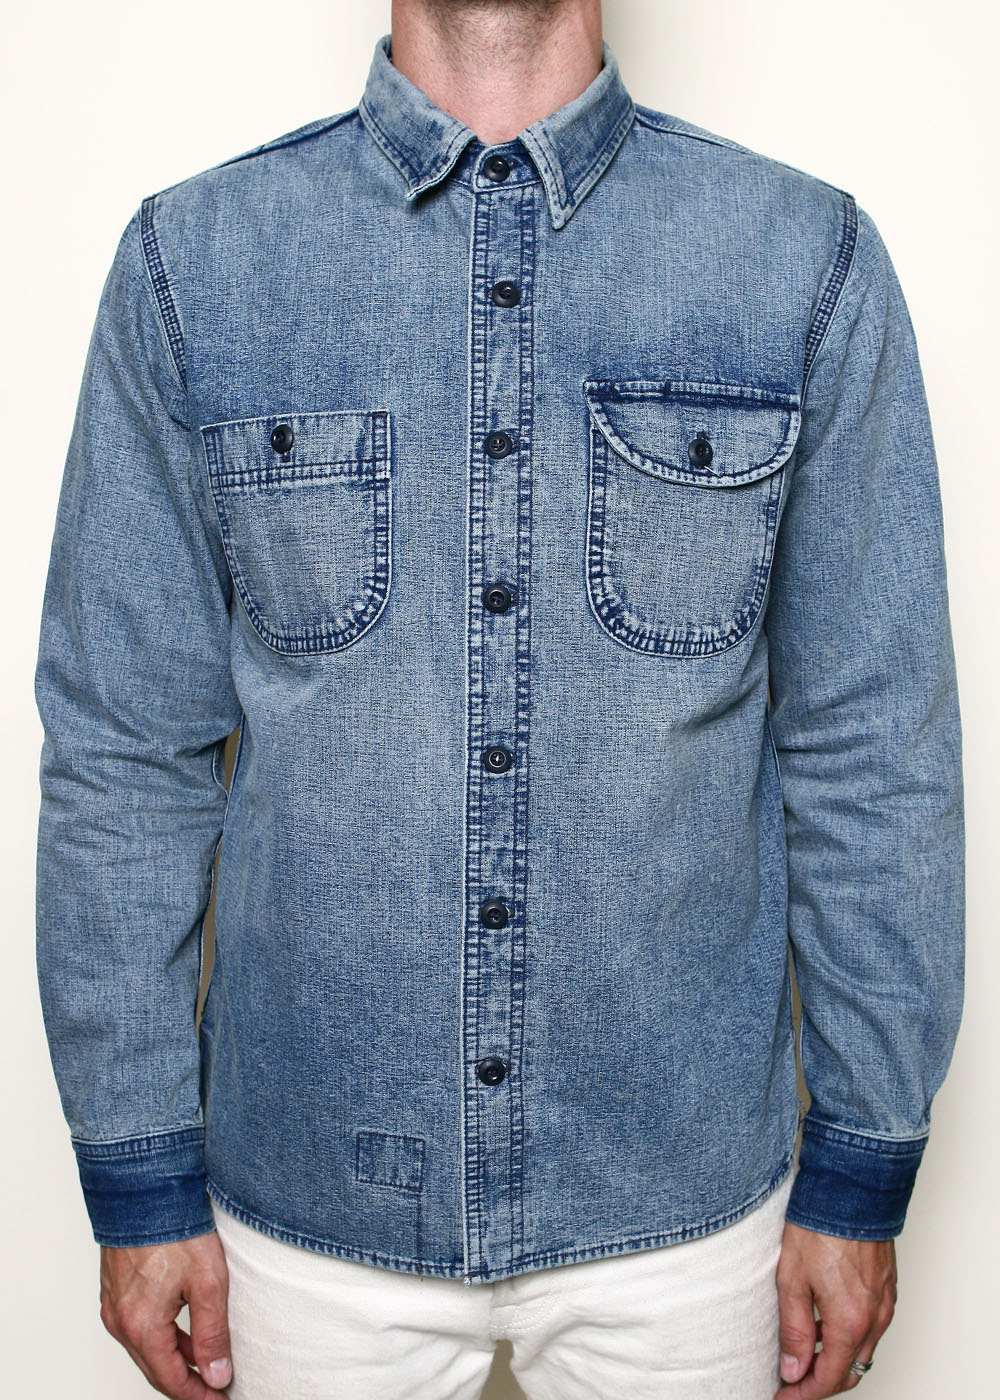 Washed Out Selvedge Indigo Supply Territory Work Rogue - Mildblend Co Shirt